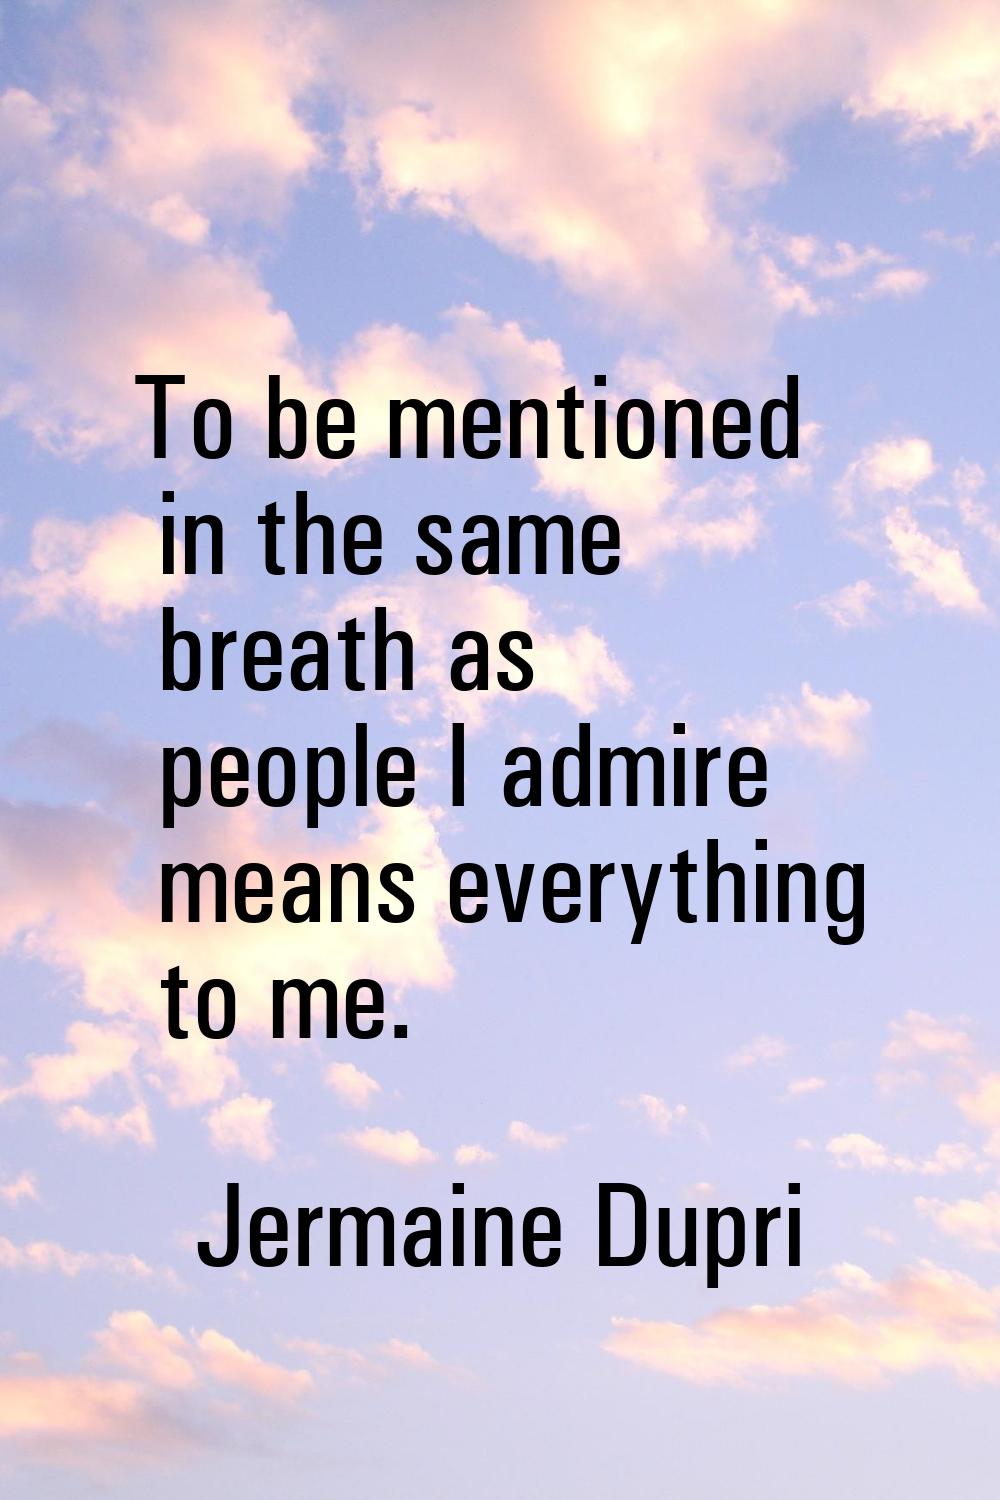 To be mentioned in the same breath as people I admire means everything to me.